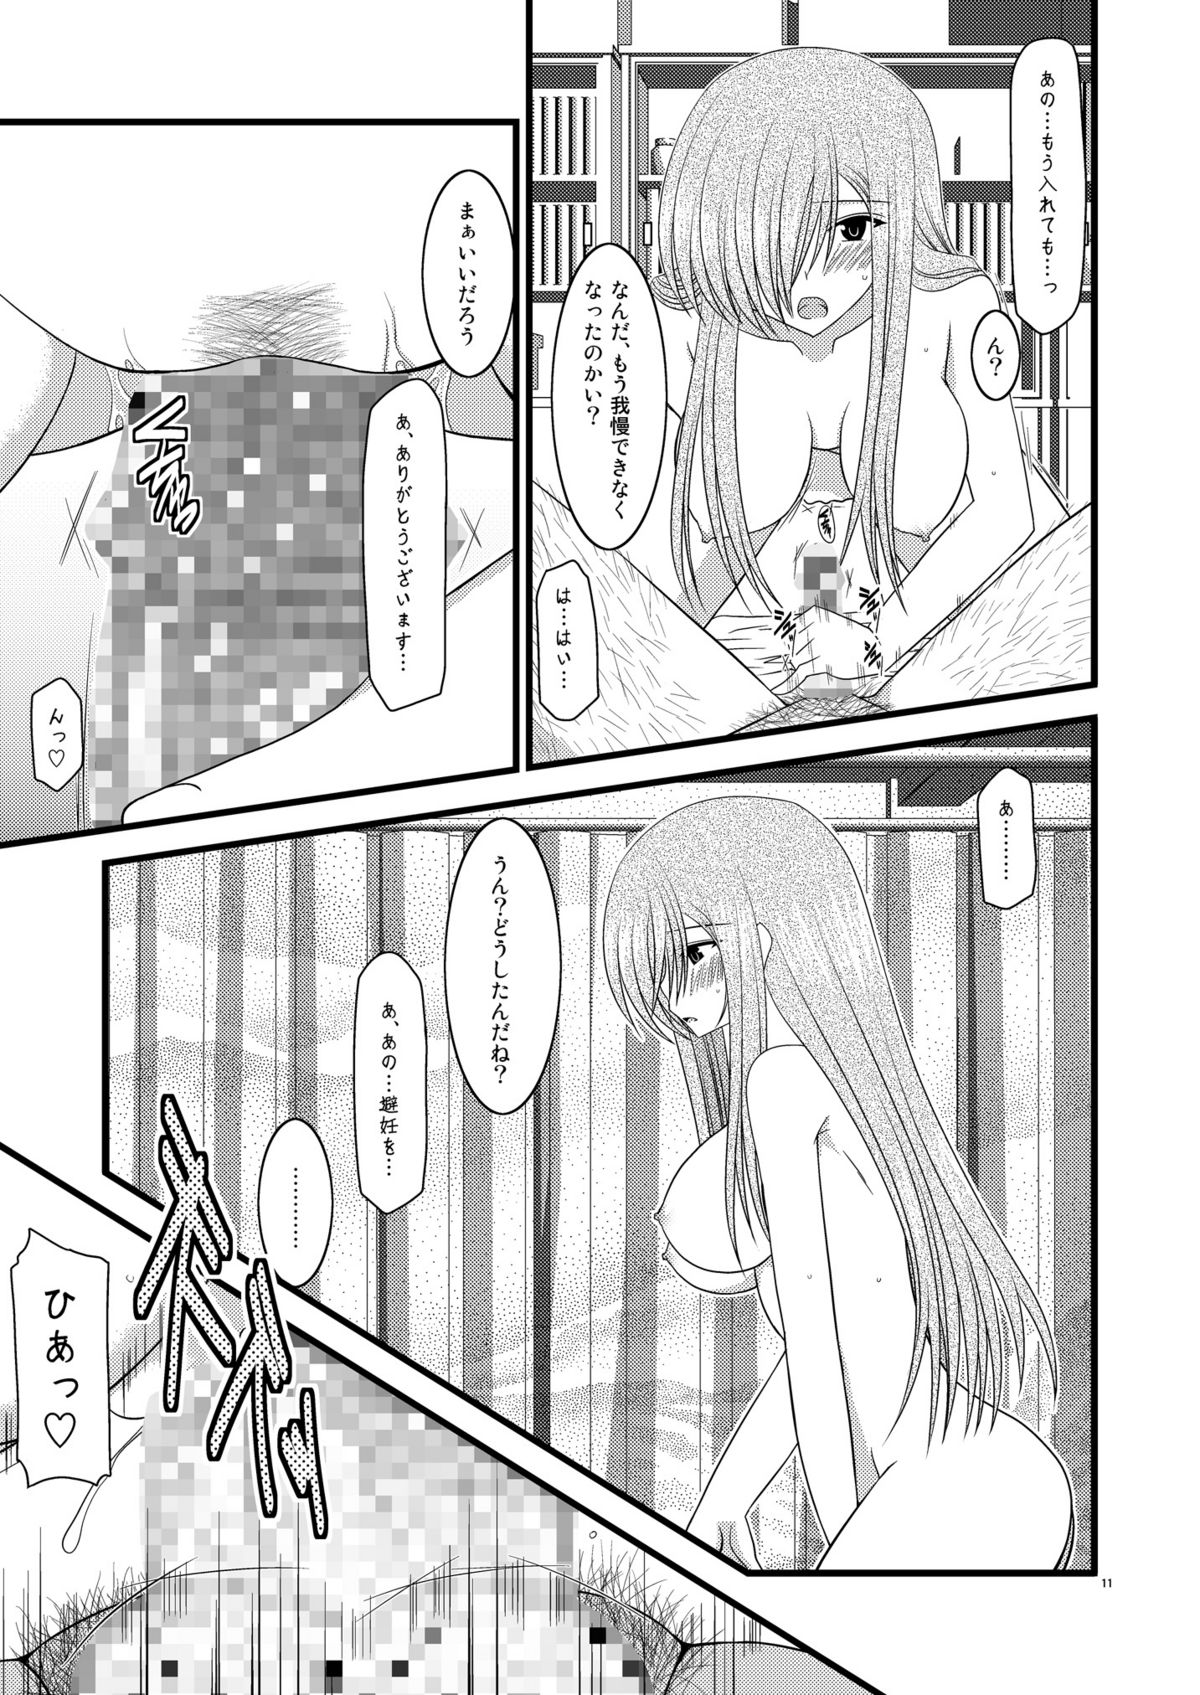 (SC41) [valssu] Melon Niku Bittake! V -the last- (Tales of the Abyss) page 11 full